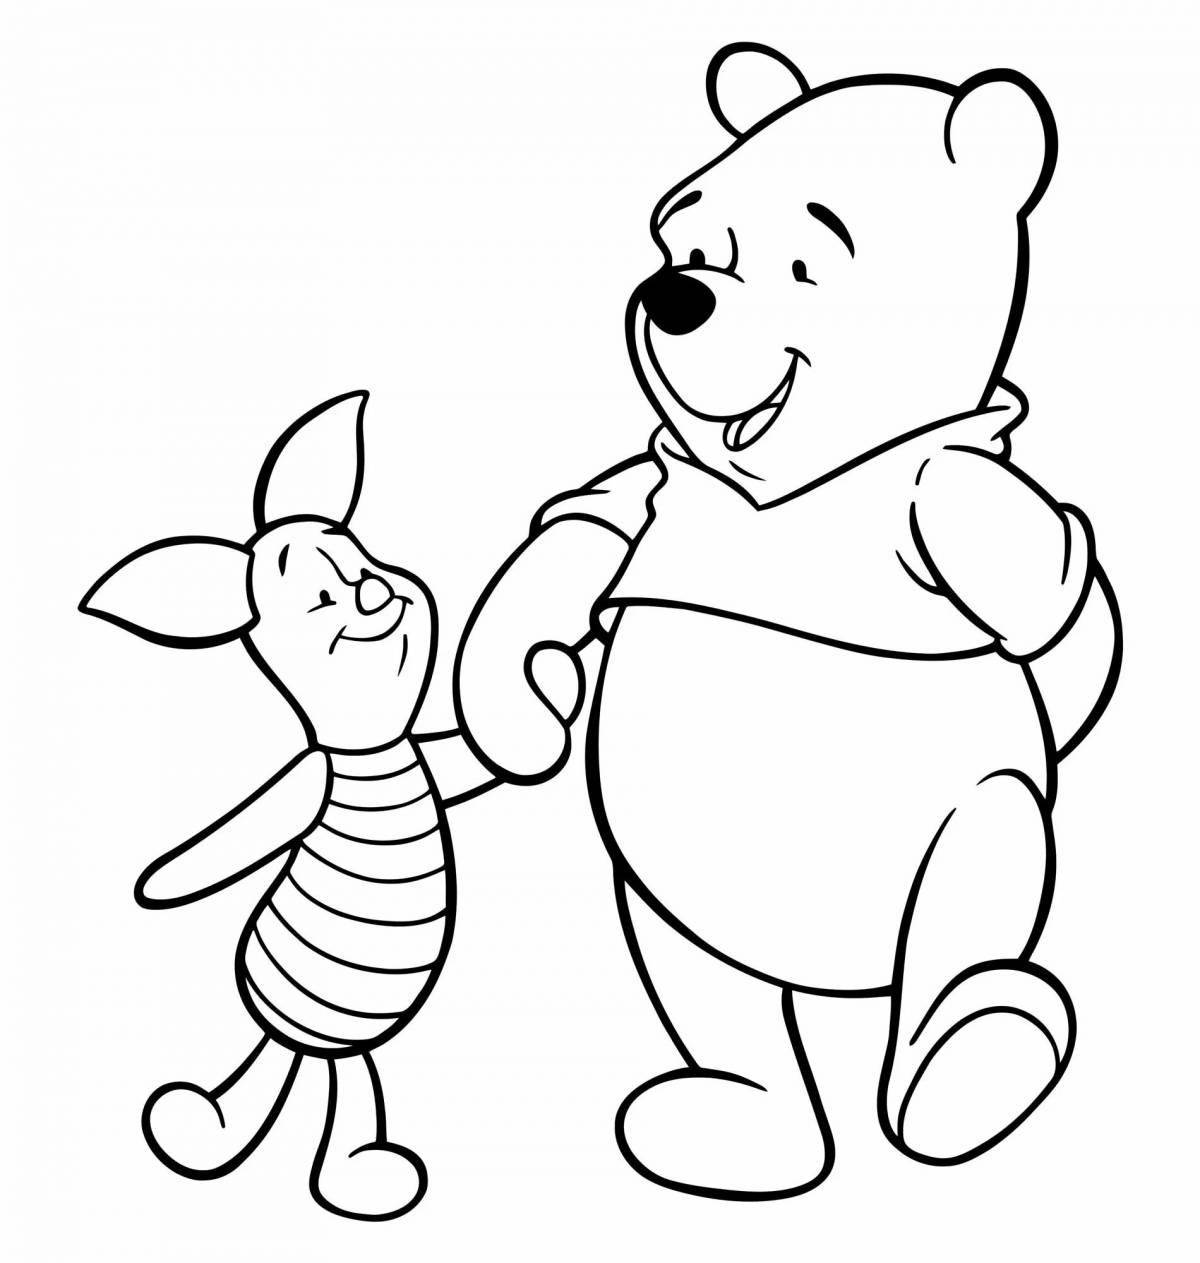 Coloring Winnie the Pooh and Friends